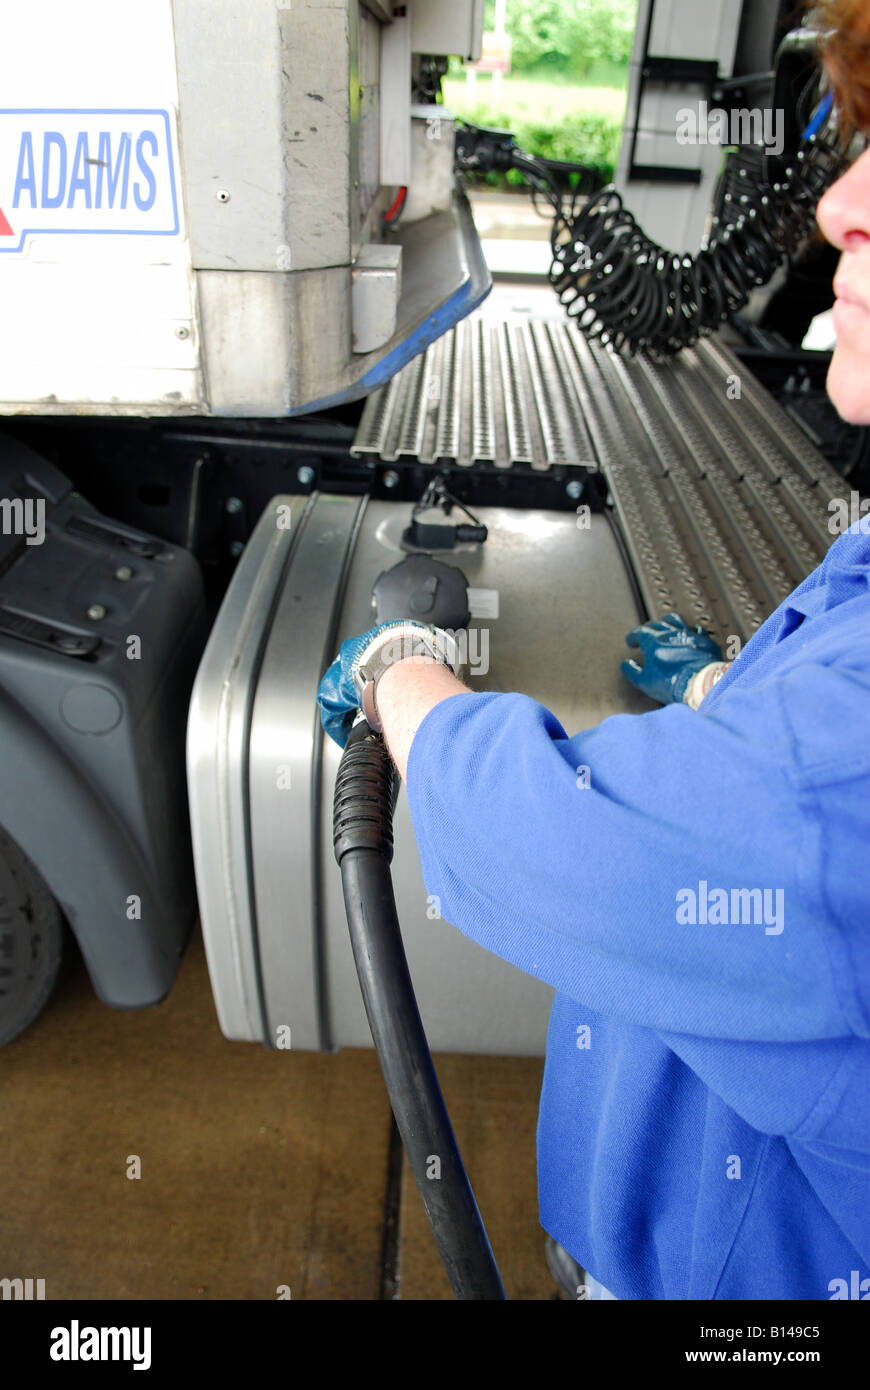 Hgv Driver Filling fuel tank at services. Stock Photo